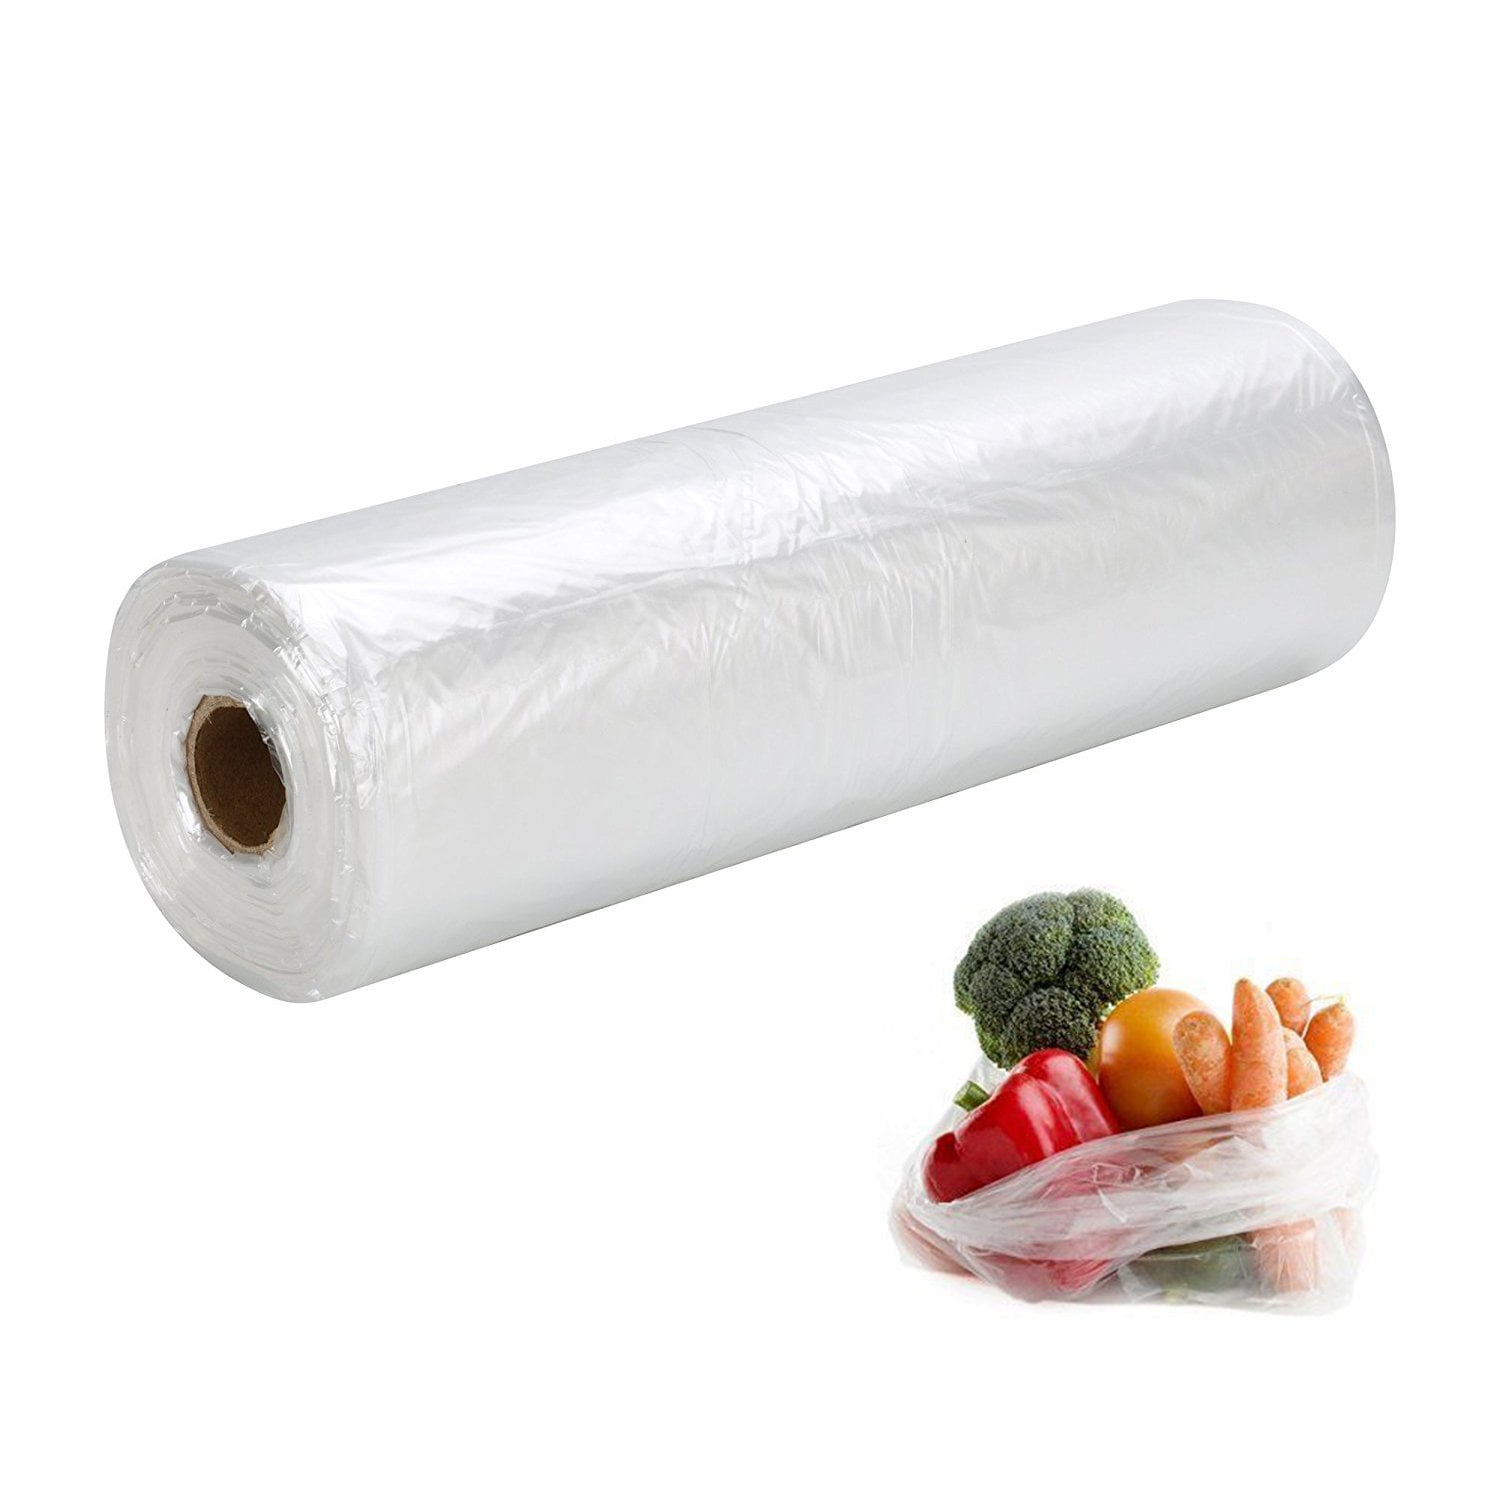 2 Roll of 350 Bags 16''x20'' Plastic Produce Clear Bag Food Storage Kitchen Tool 